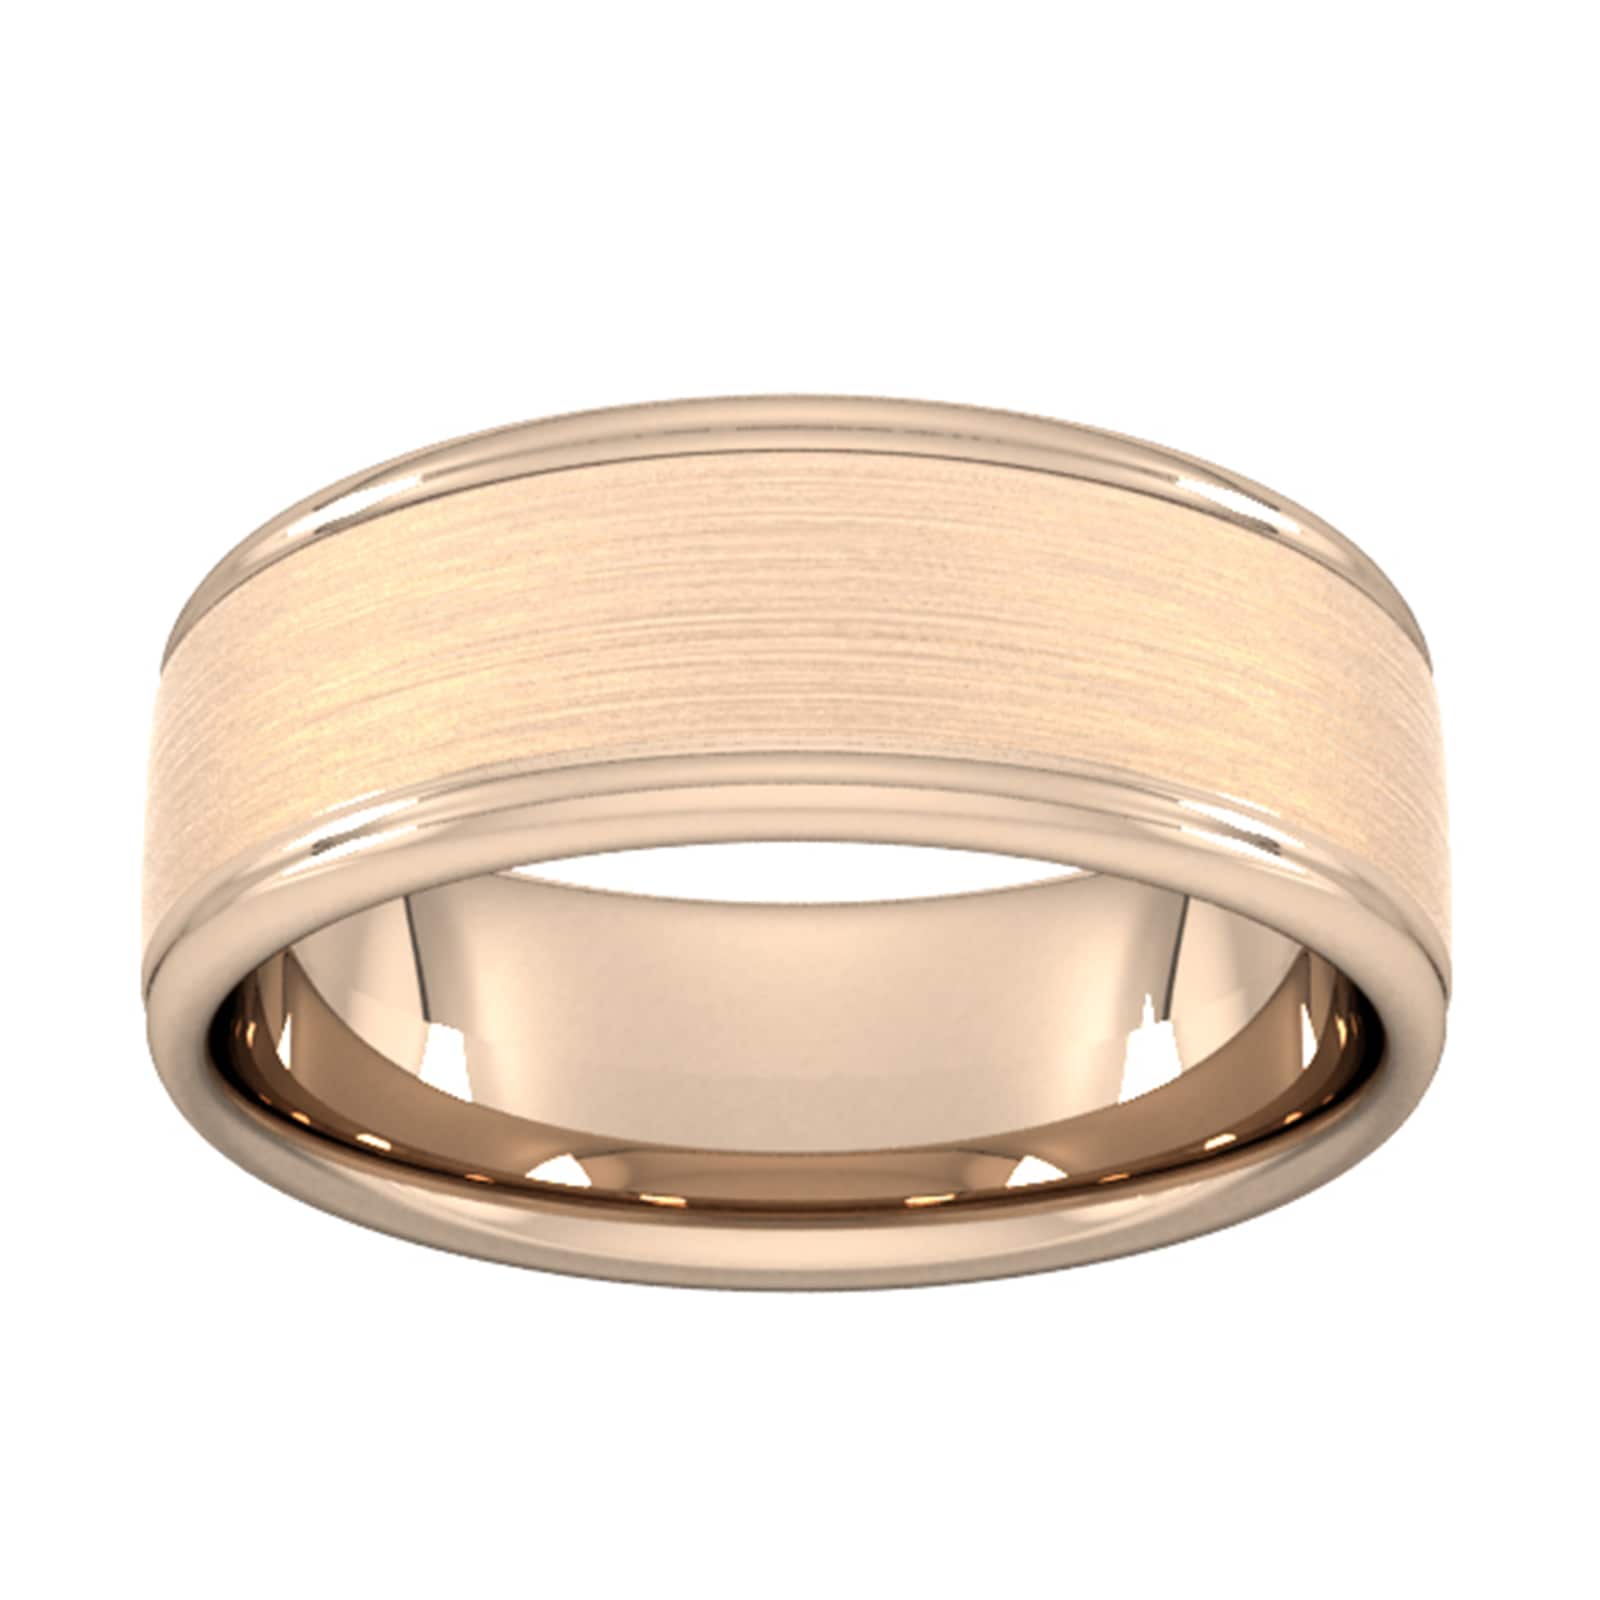 8mm D Shape Heavy Matt Centre With Grooves Wedding Ring In 9 Carat Rose Gold - Ring Size Q